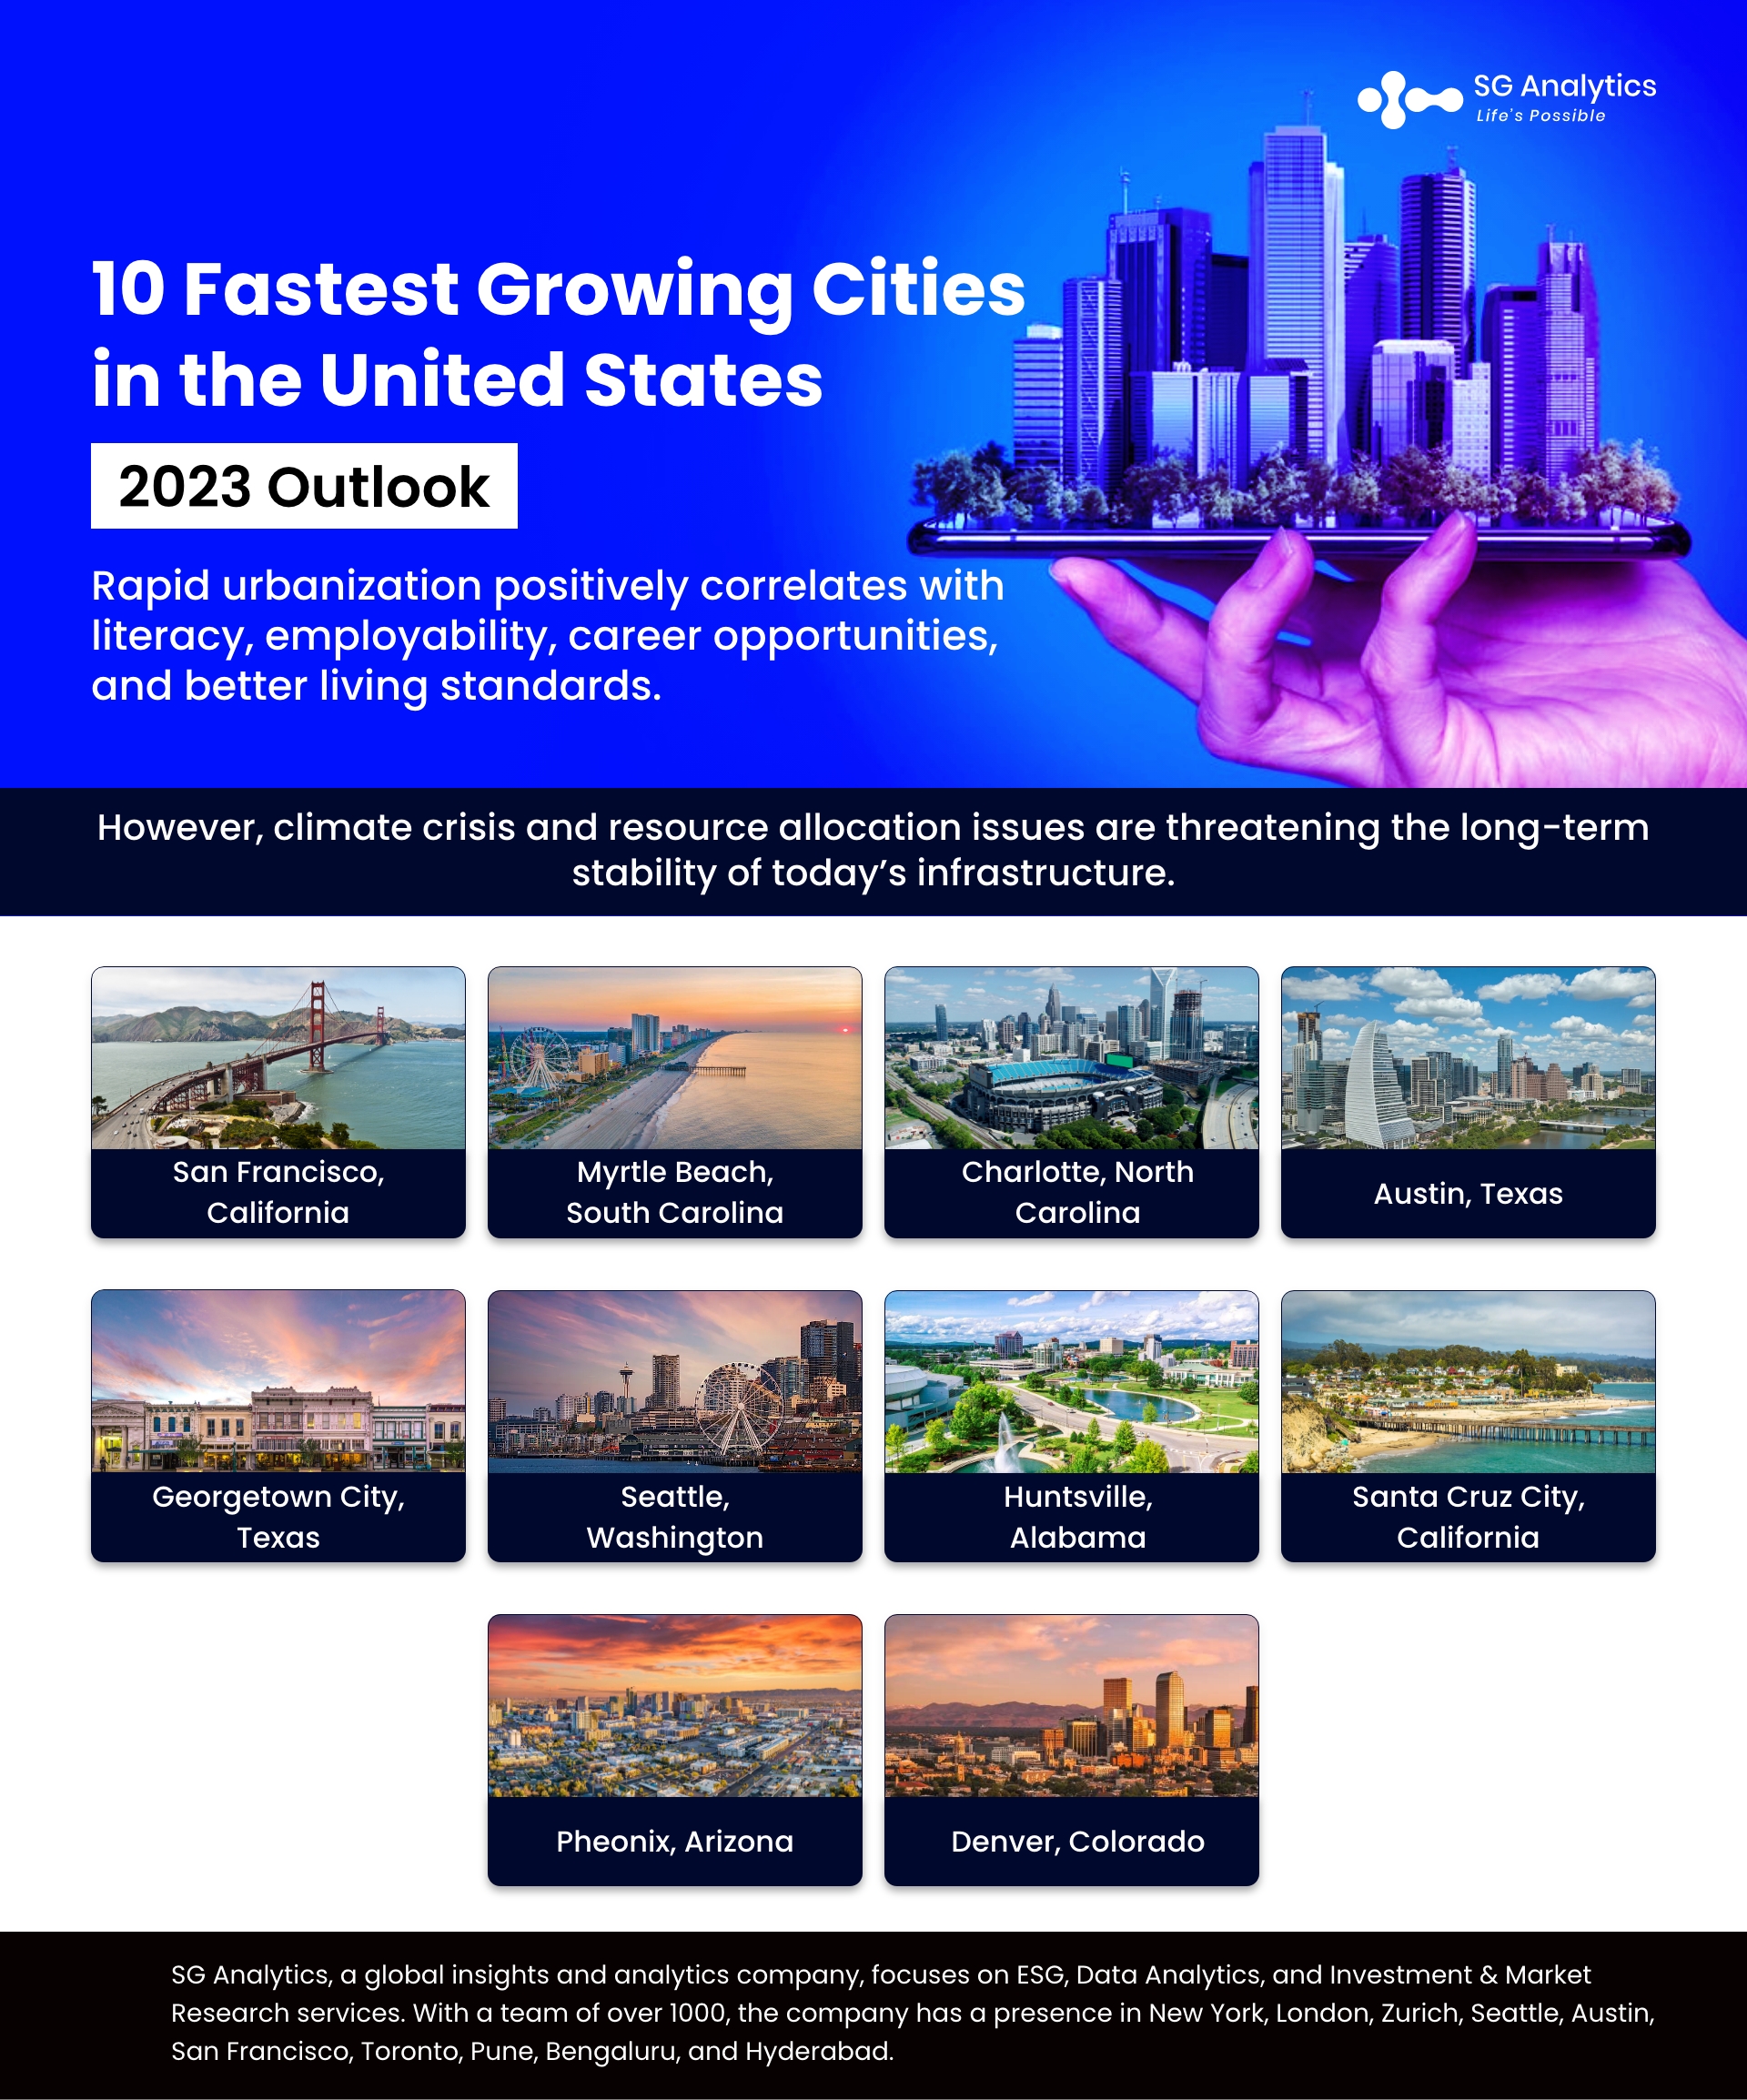 10 Fastest Growing Cities in the United States